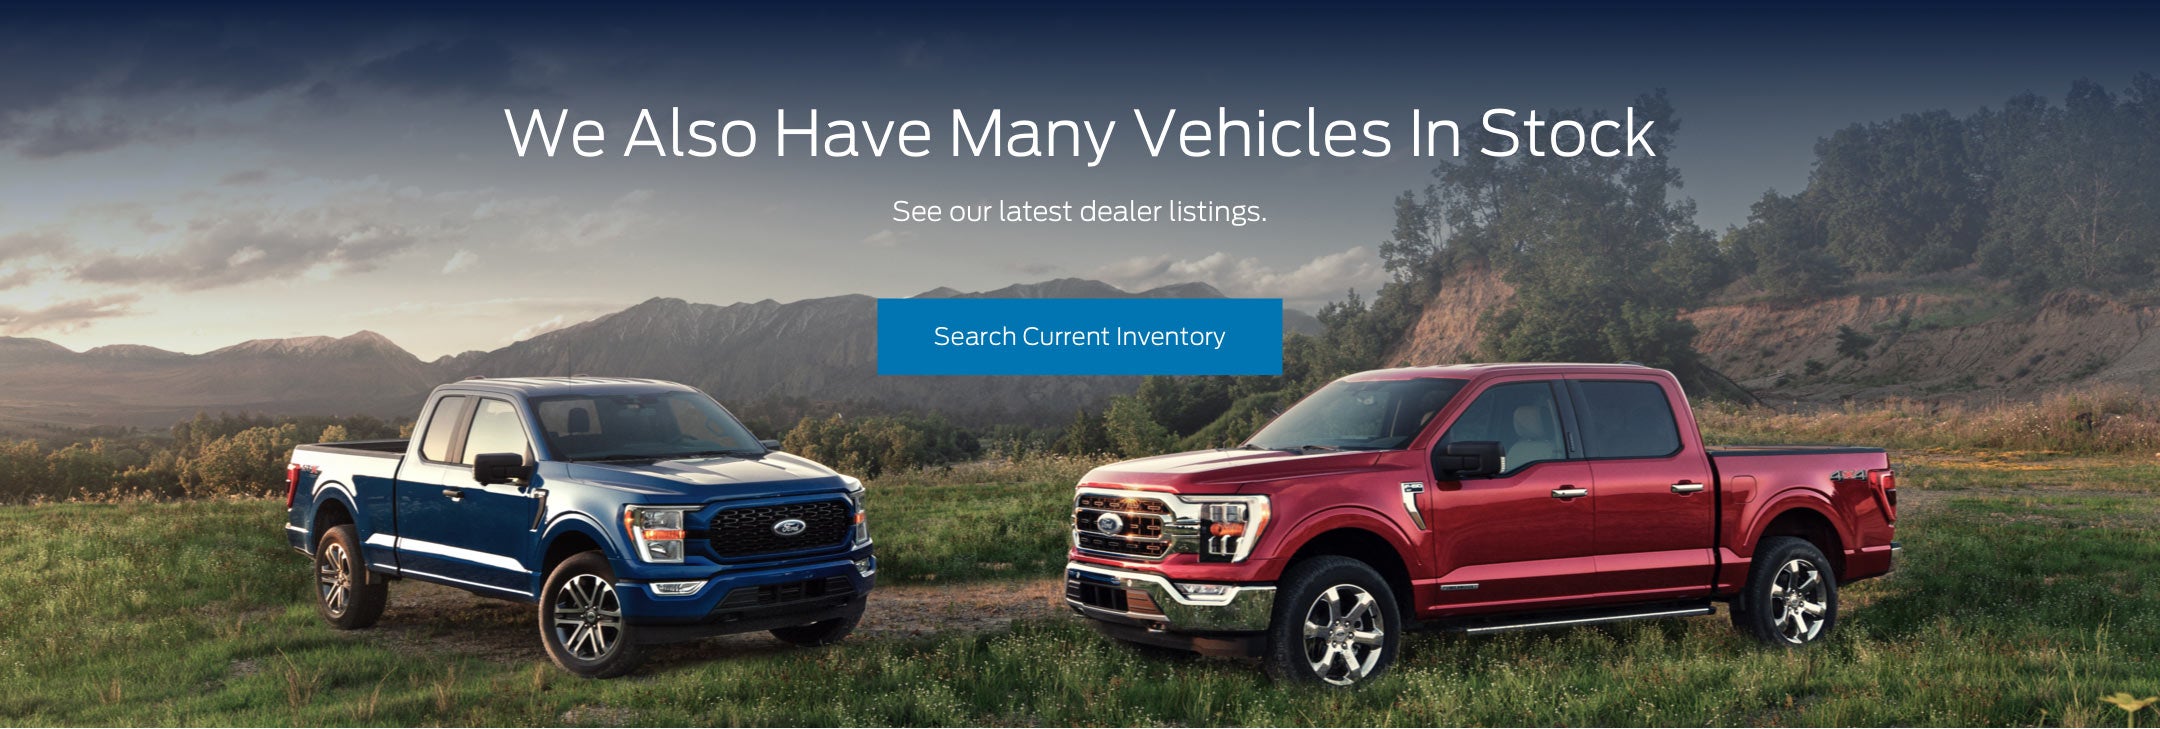 Ford vehicles in stock | Koons Ford of Baltimore in Baltimore MD